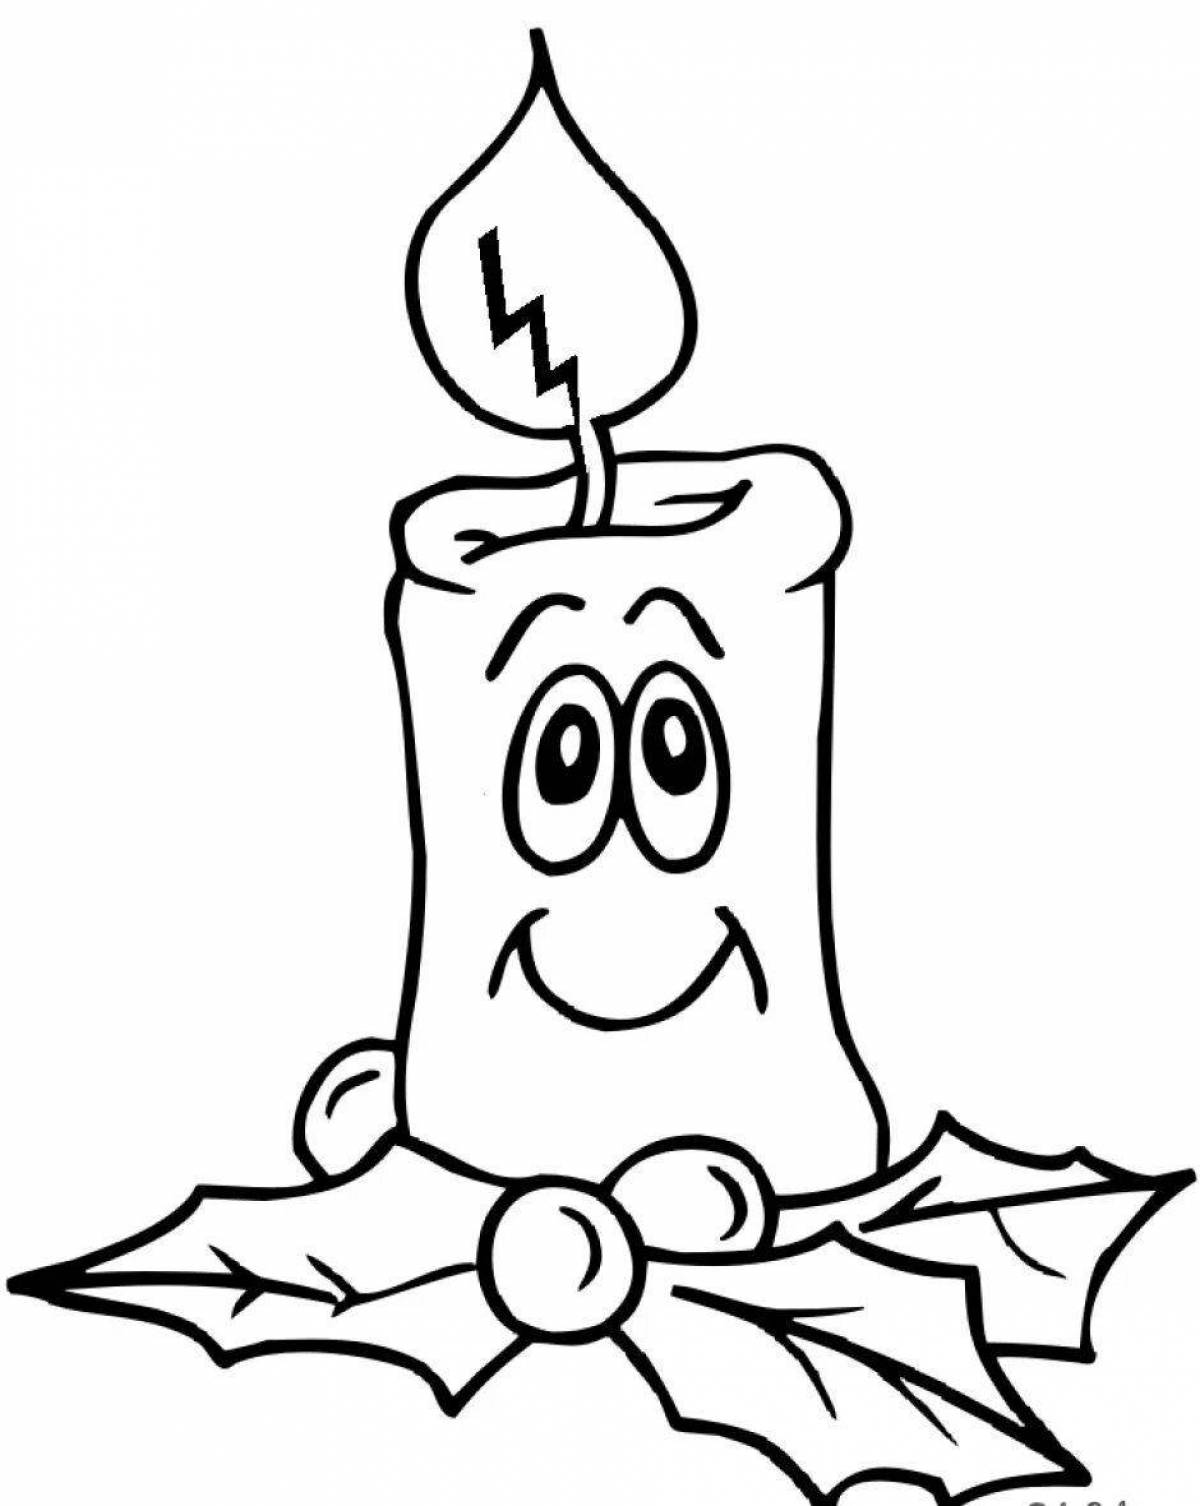 Colorful christmas candle coloring page